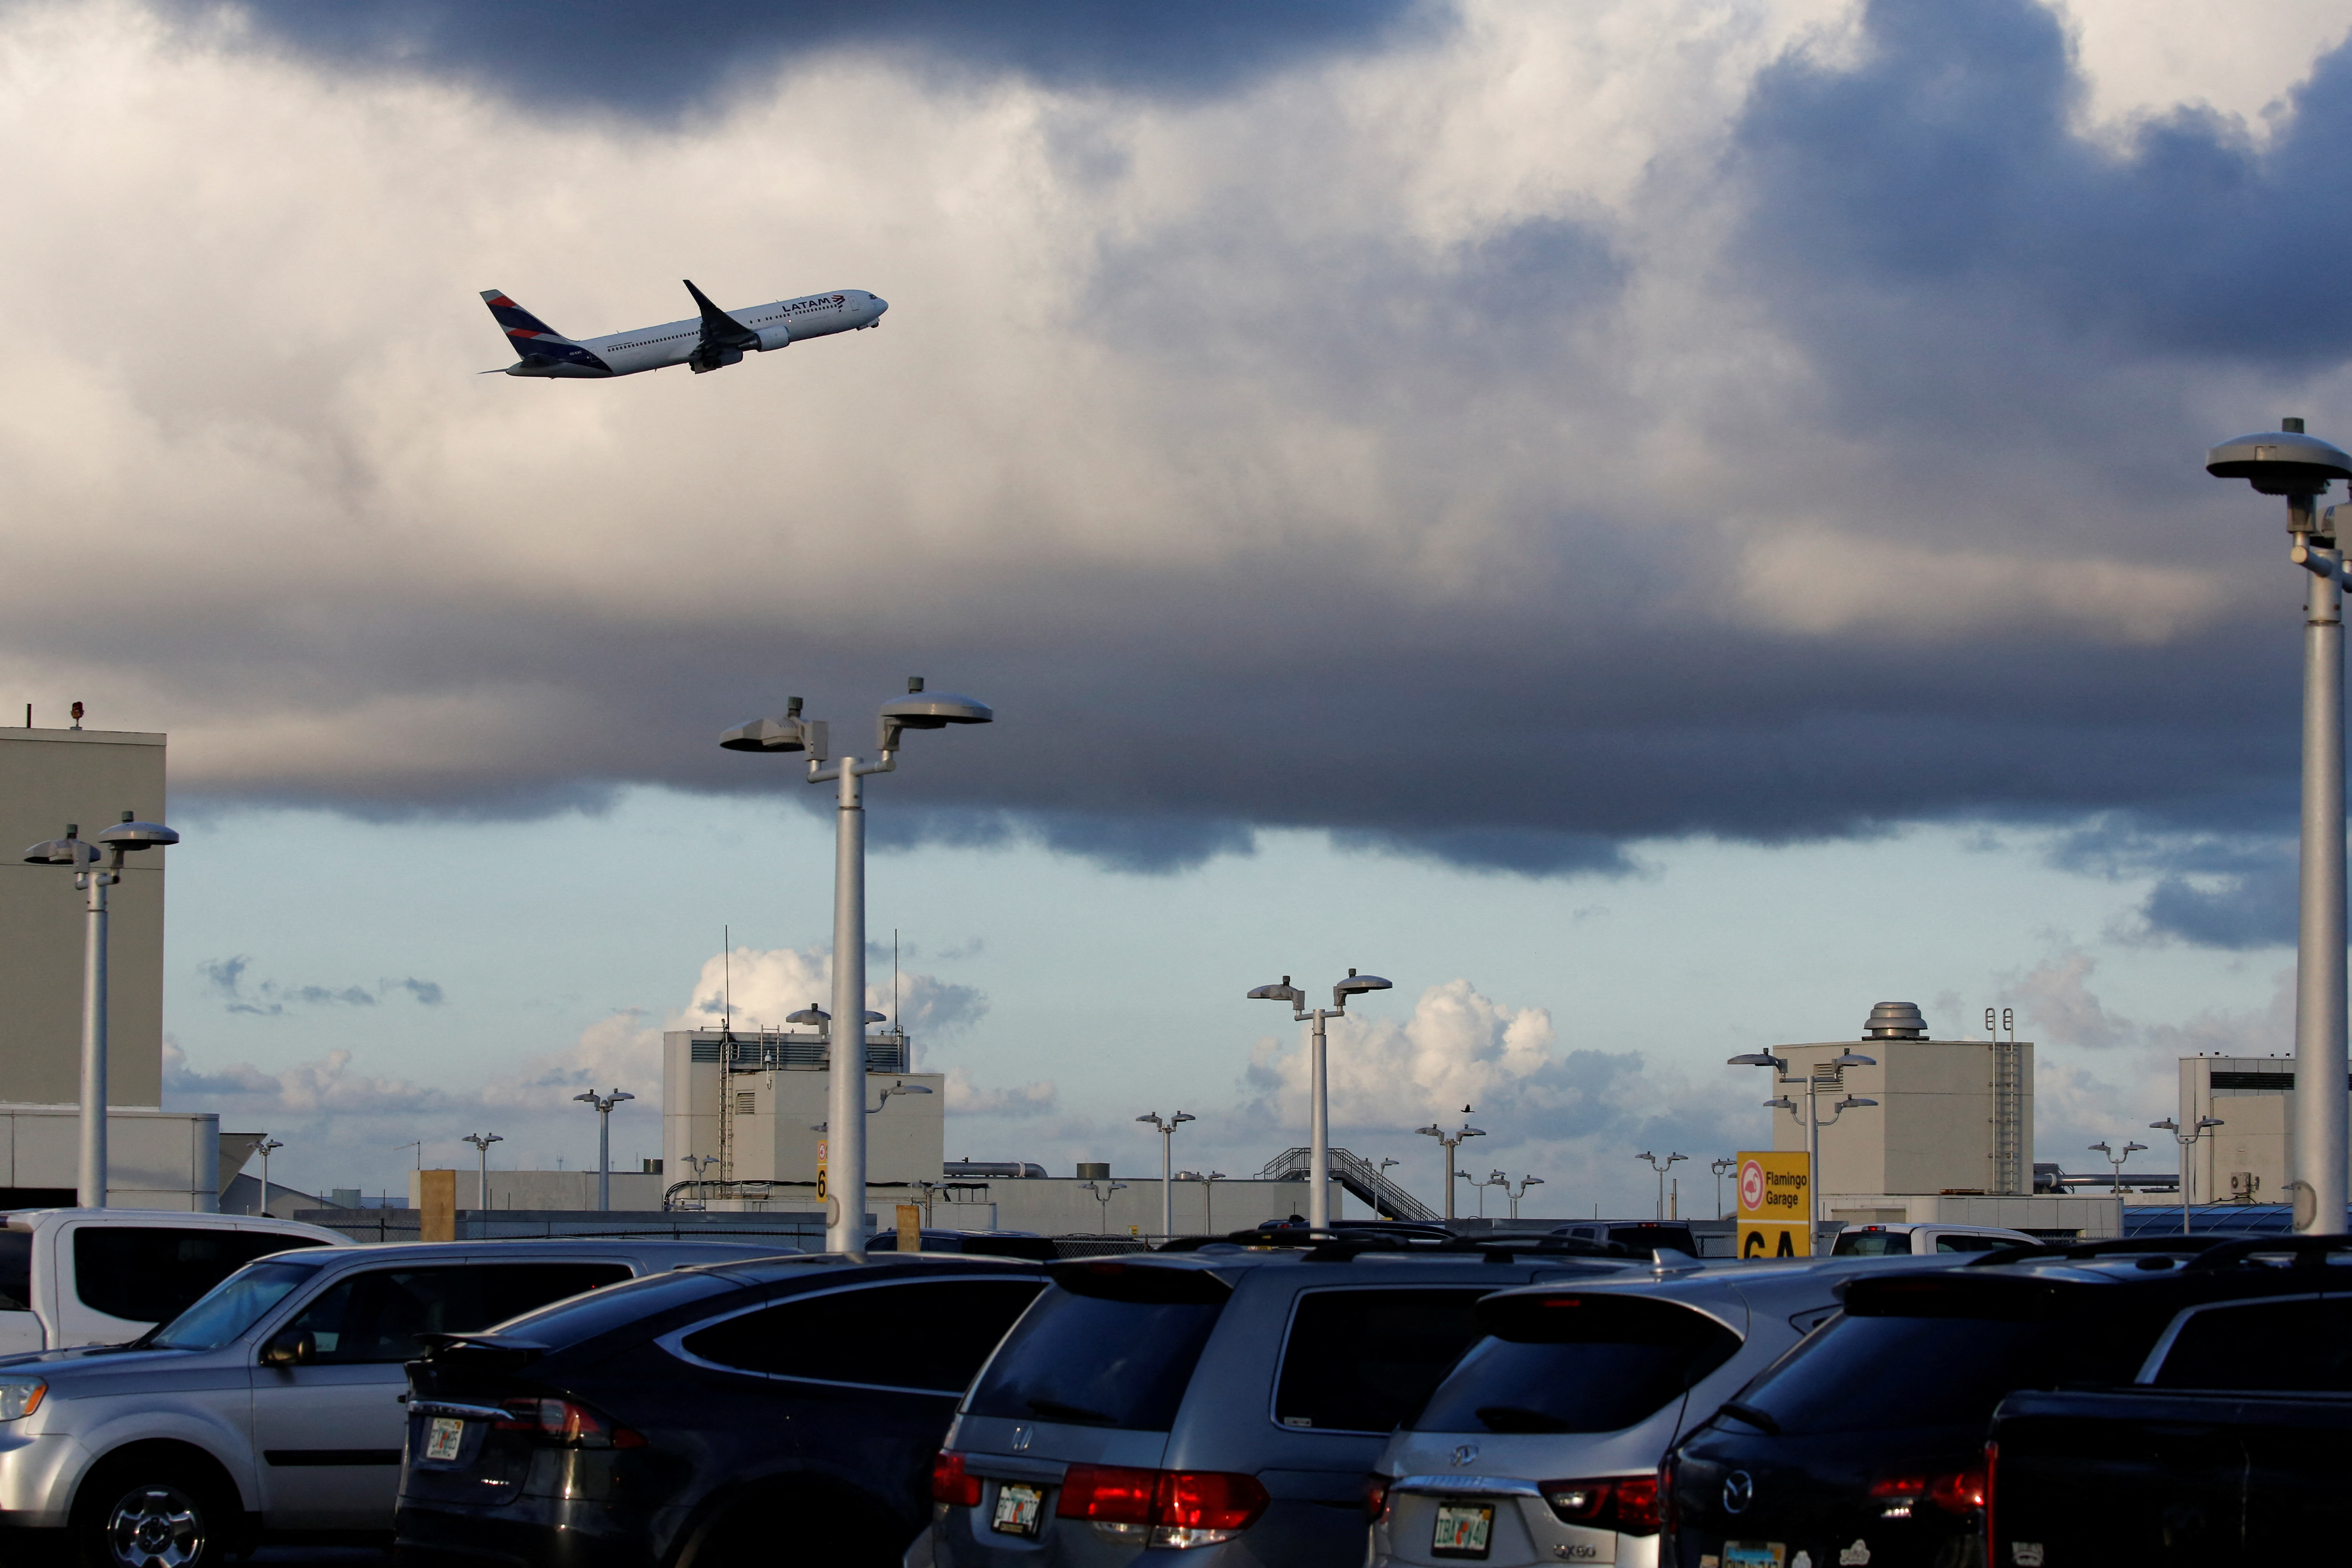 Federal Aviation Administration (FAA) slows the volume of airplane traffic over Florida